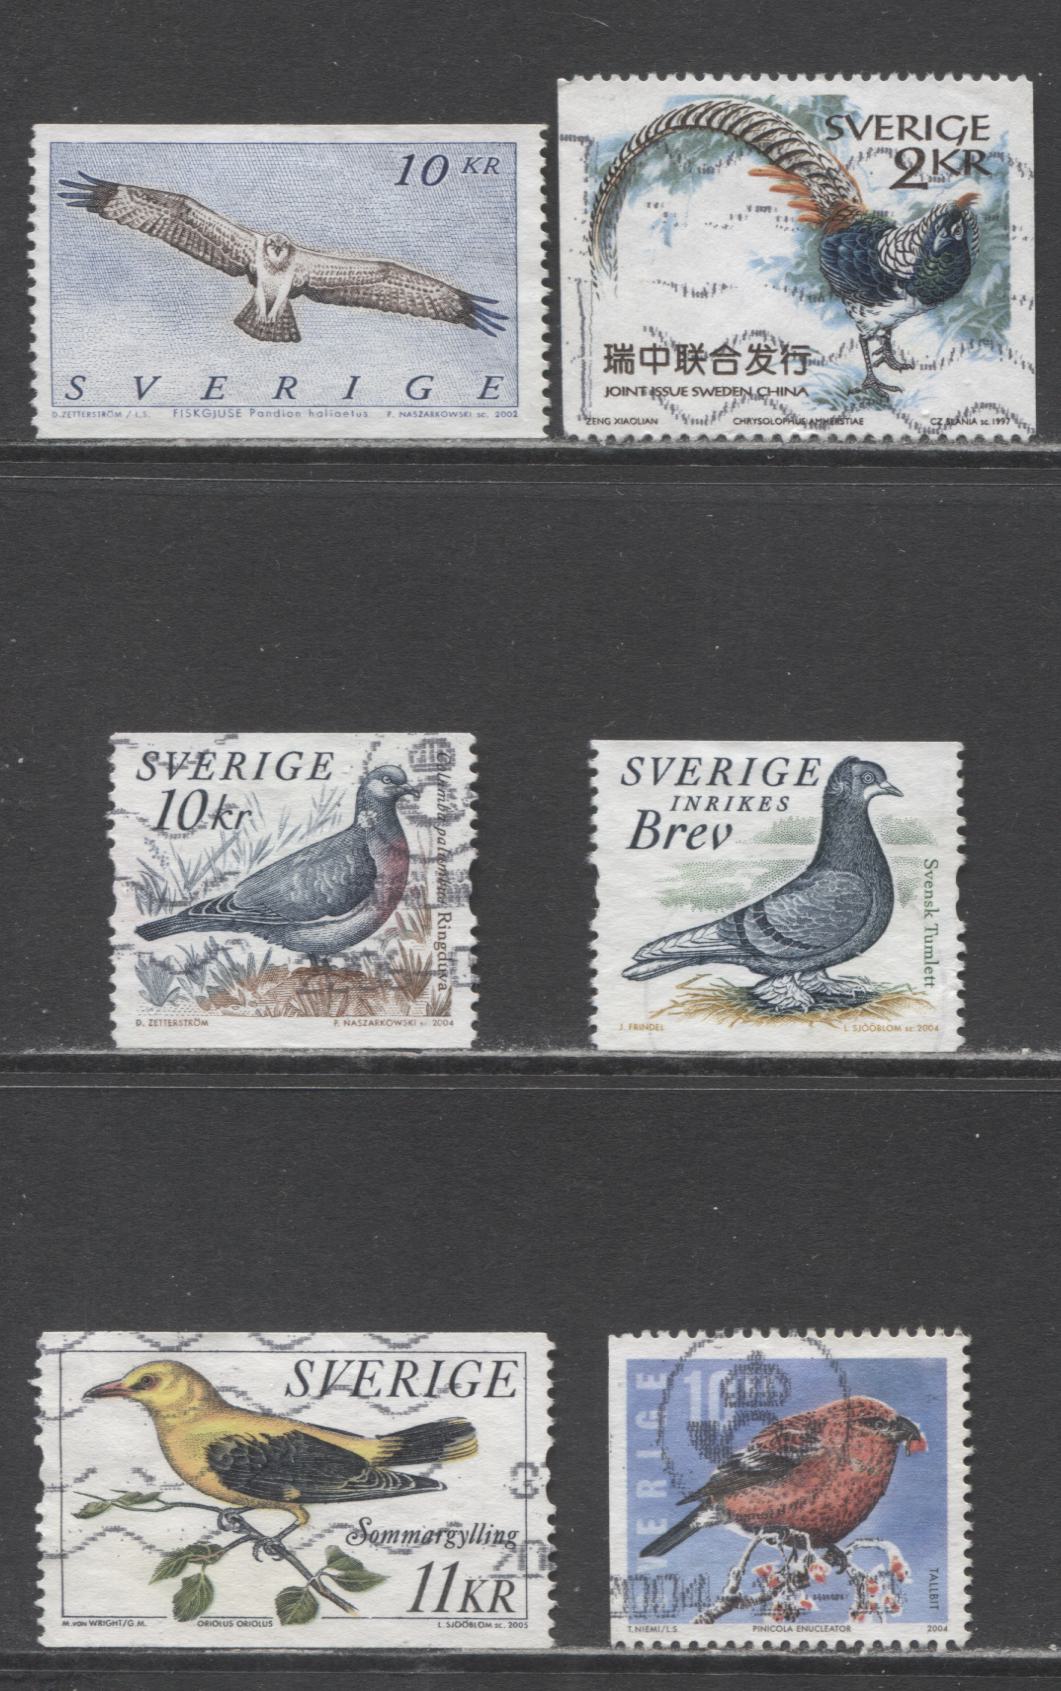 Lot 8 Sweden SC#2226/2505 1997-2005 Pheasants - Oriolus Issues, 6 Fine/Very Fine Used Singles, Click on Listing to See ALL Pictures, Estimated Value $5